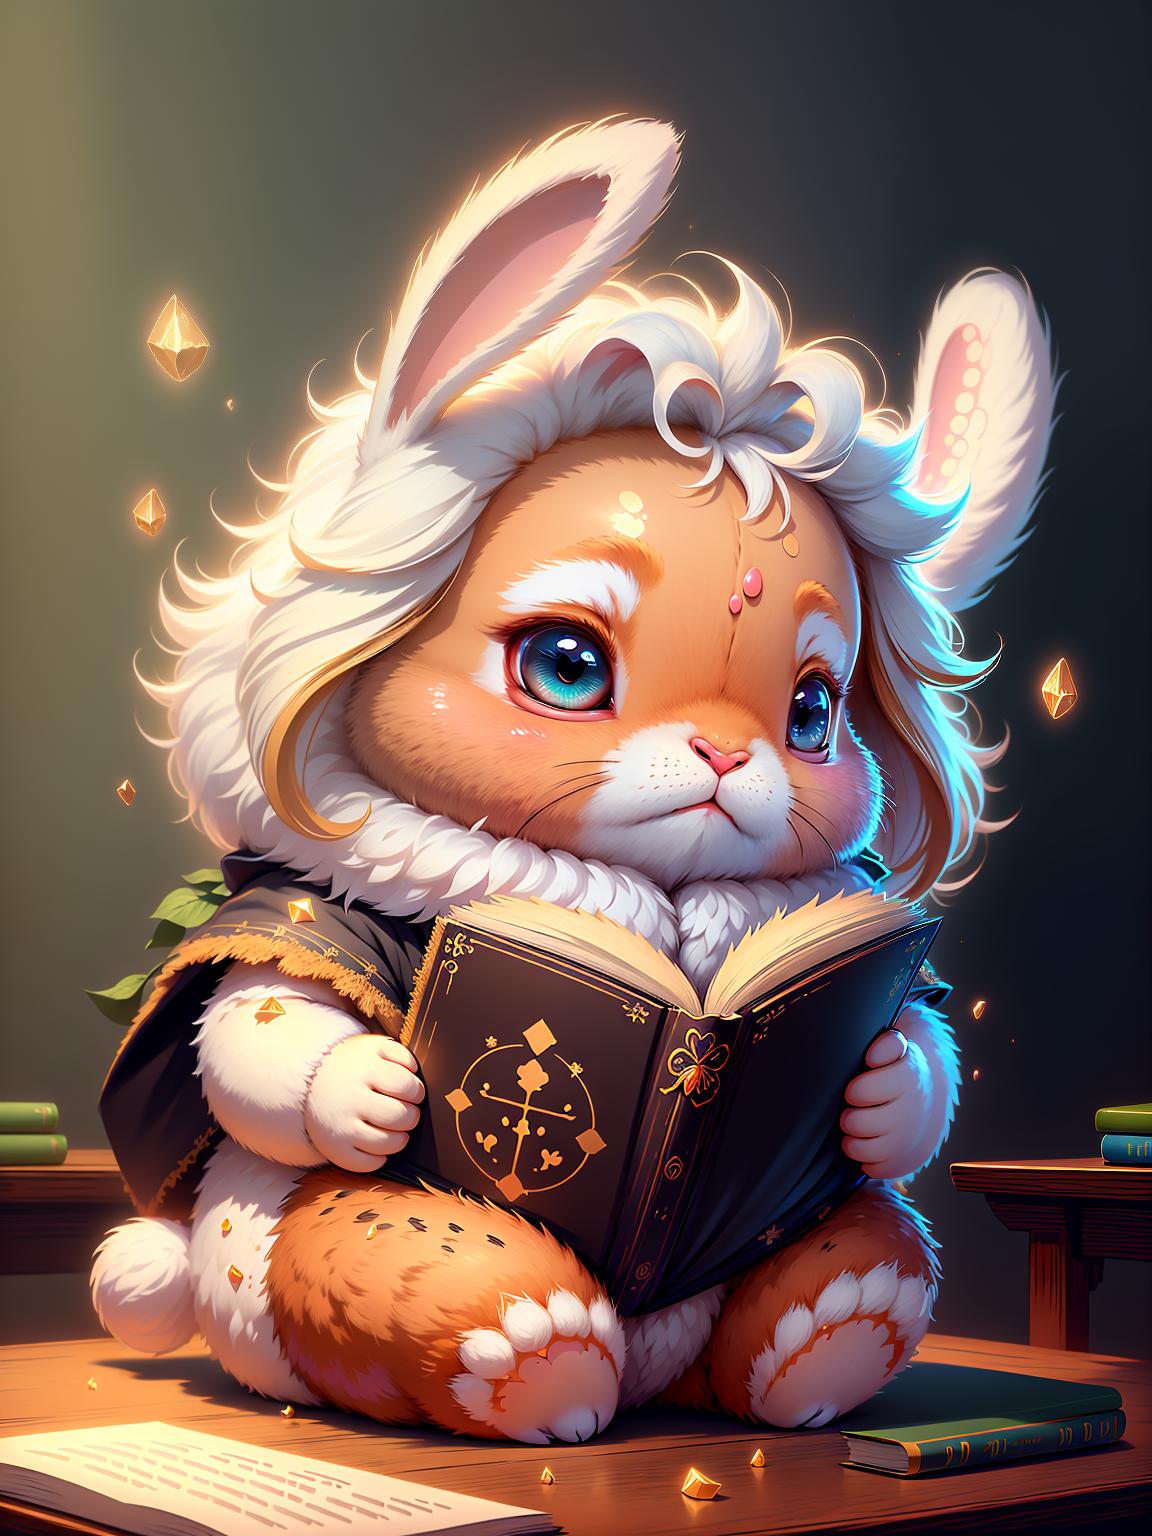  master piece, best quality, ultra detailed, highres, 4k.8k, Rabbit teacher, Teaching, guiding, interacting, comforting, Gentle, caring, joyful, patient, BREAK Kind rabbit teacher, surrounded by fluffy fur, loves teaching students., Cozy classroom, Books, desks, blackboard, educational materials, BREAK Warm and inviting, Soft lighting, friendly aura, educational vibe, serene mood, magic particles,Cu73Cre4ture,fun00d